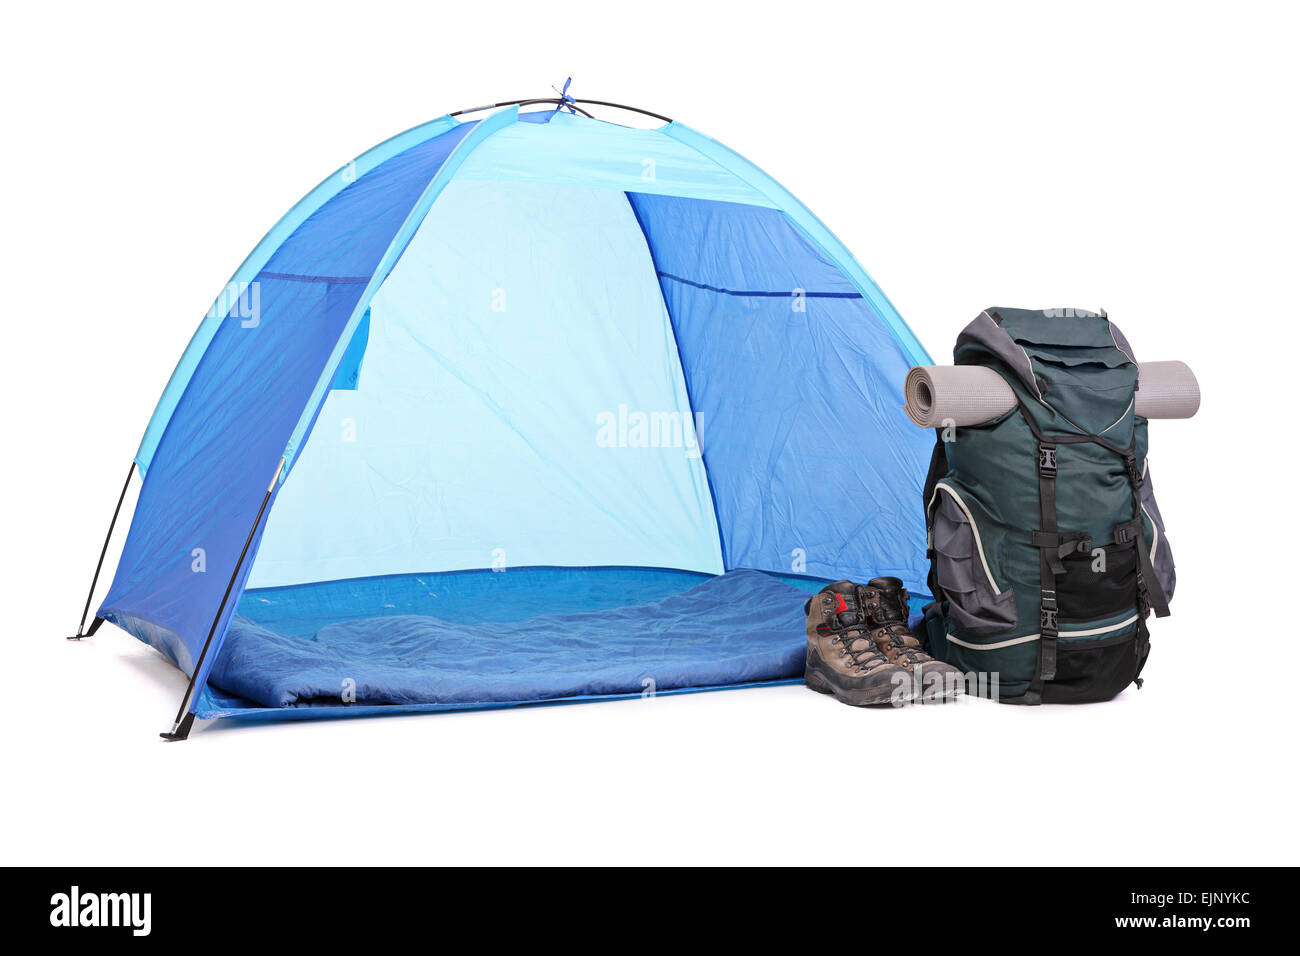 Studio shot of a blue tent, a green rucksack and a pair of boots left next to the tent isolated on white background Stock Photo